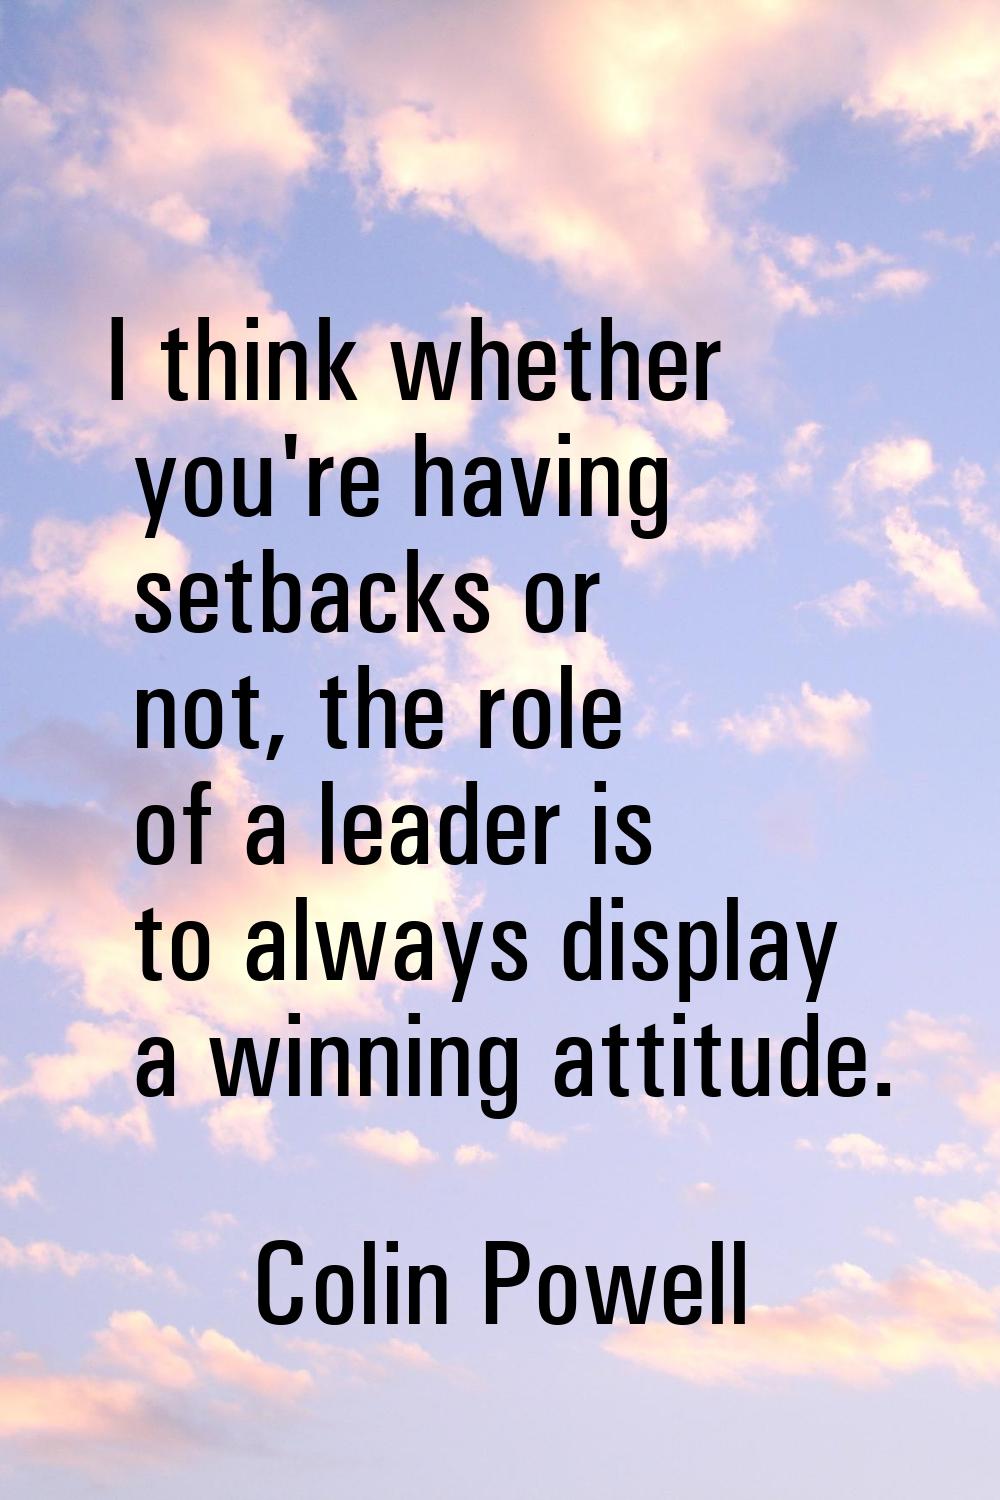 I think whether you're having setbacks or not, the role of a leader is to always display a winning 